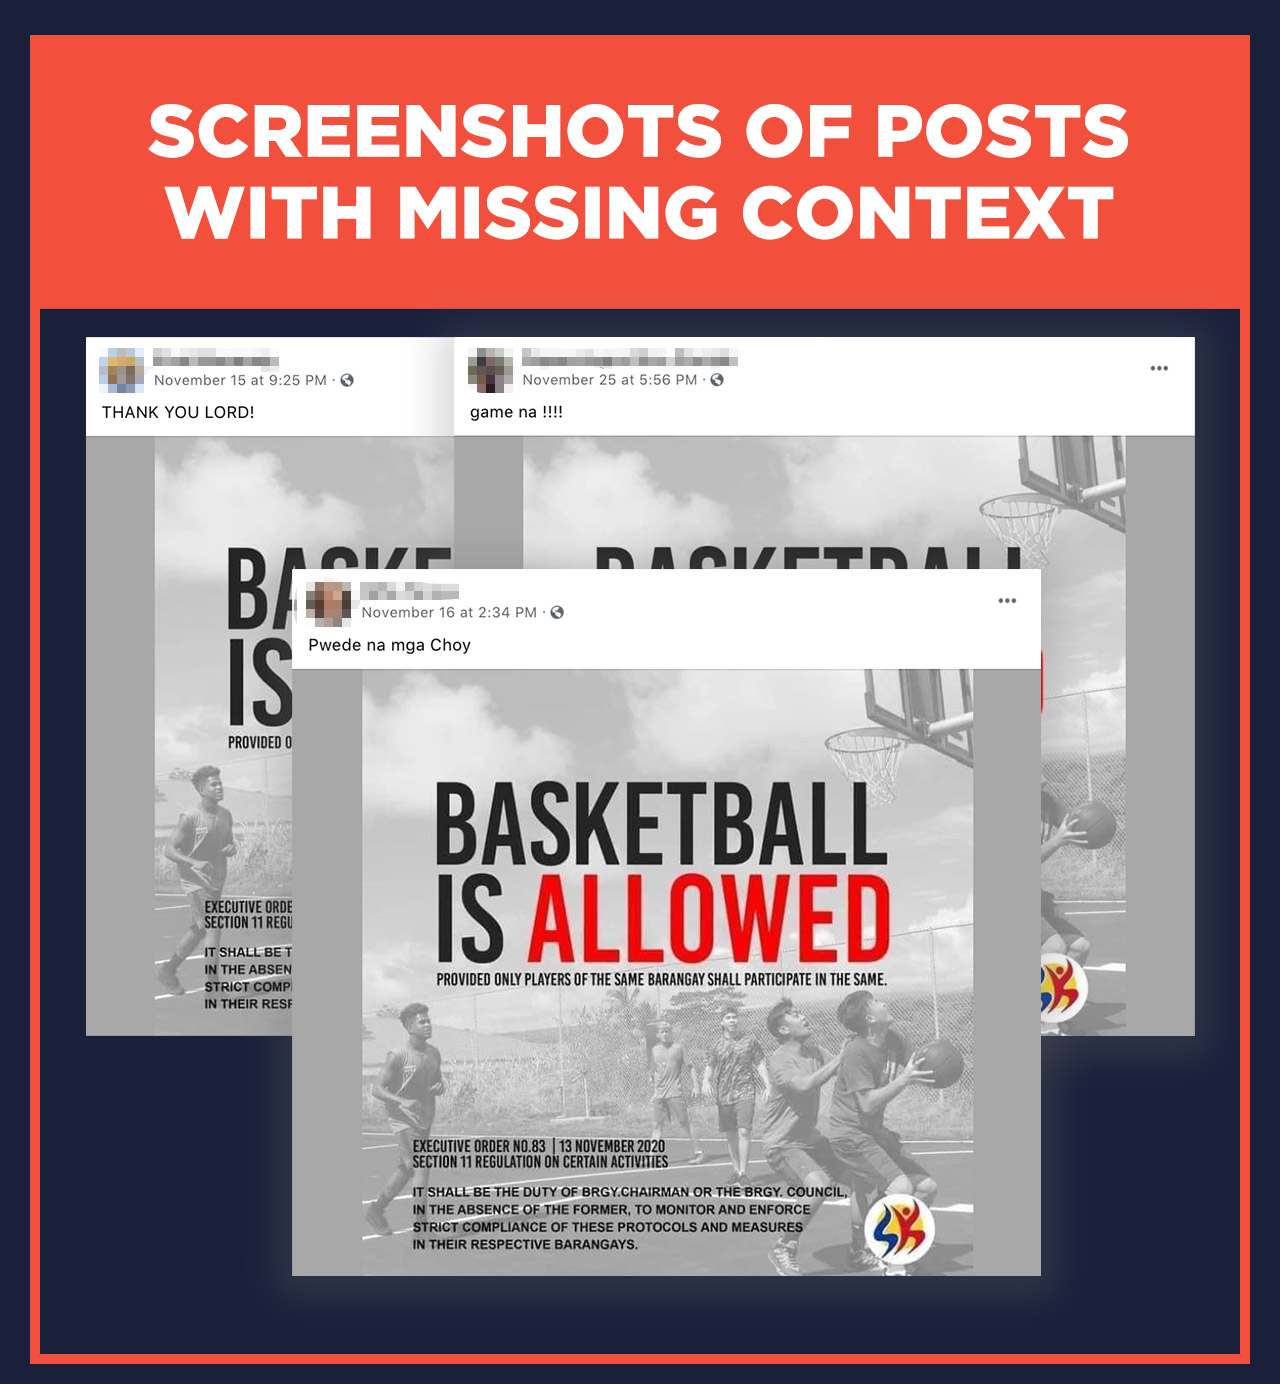 MISSING CONTEXT POSTS Basketball allowed within barangays